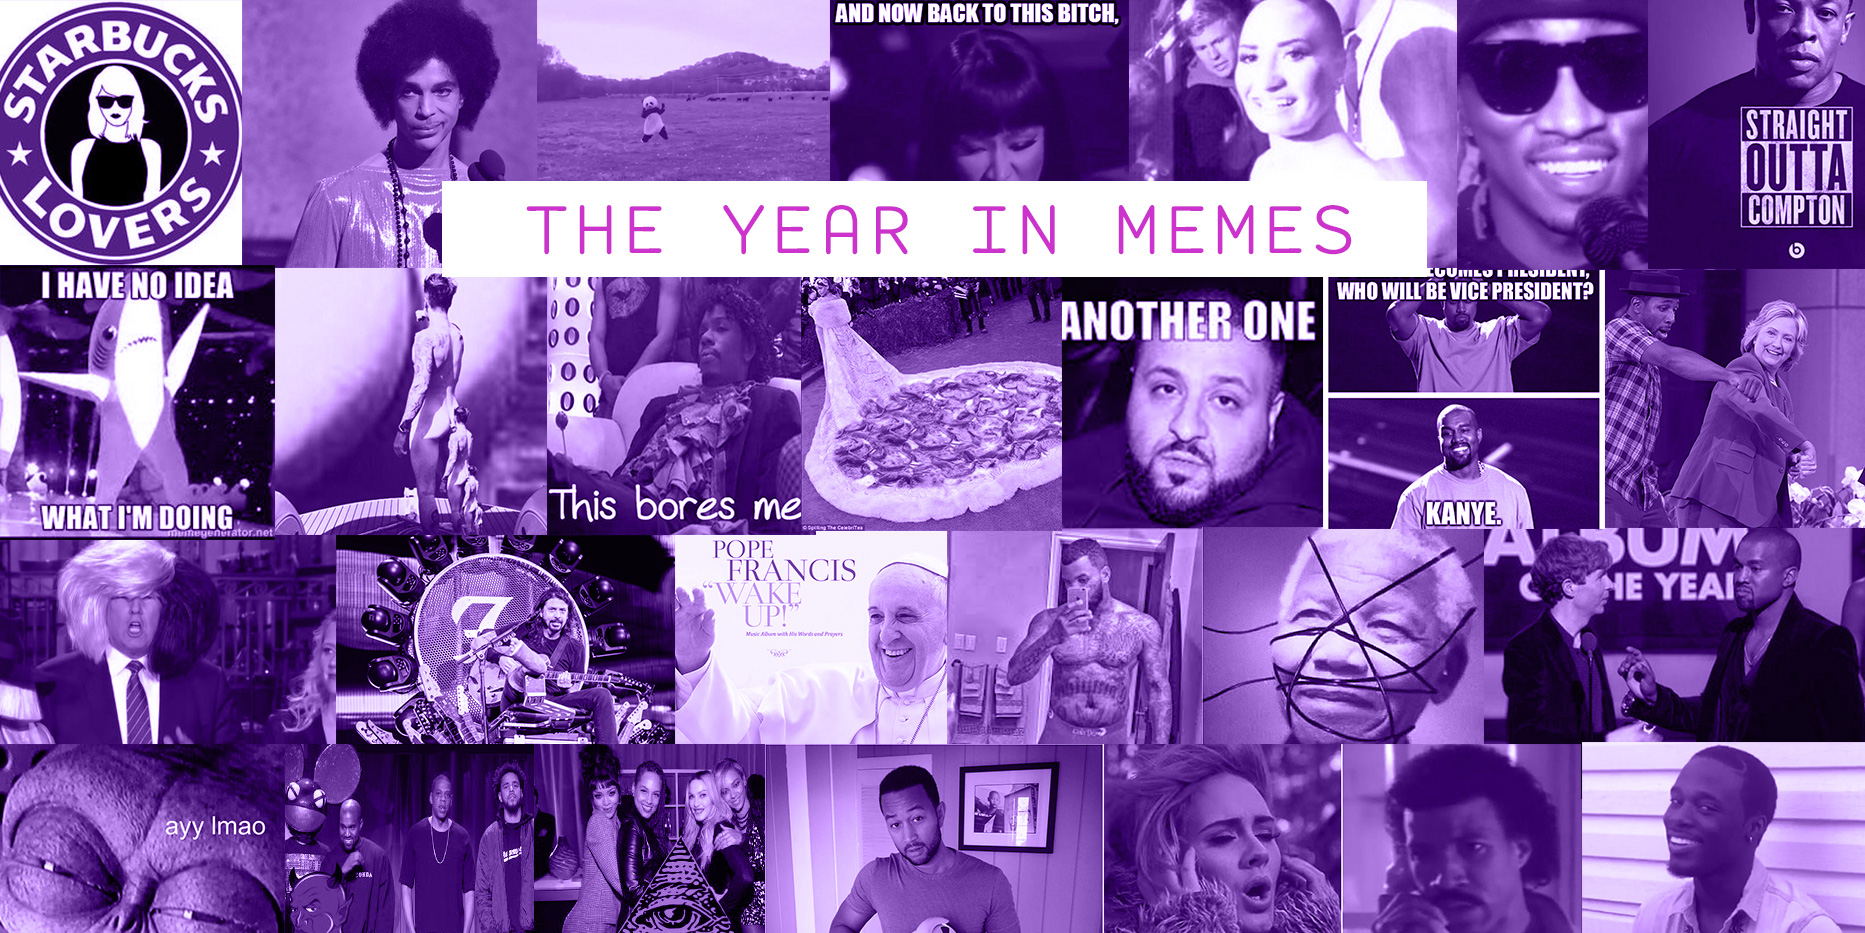 The Year in Memes 2015 | Pitchfork